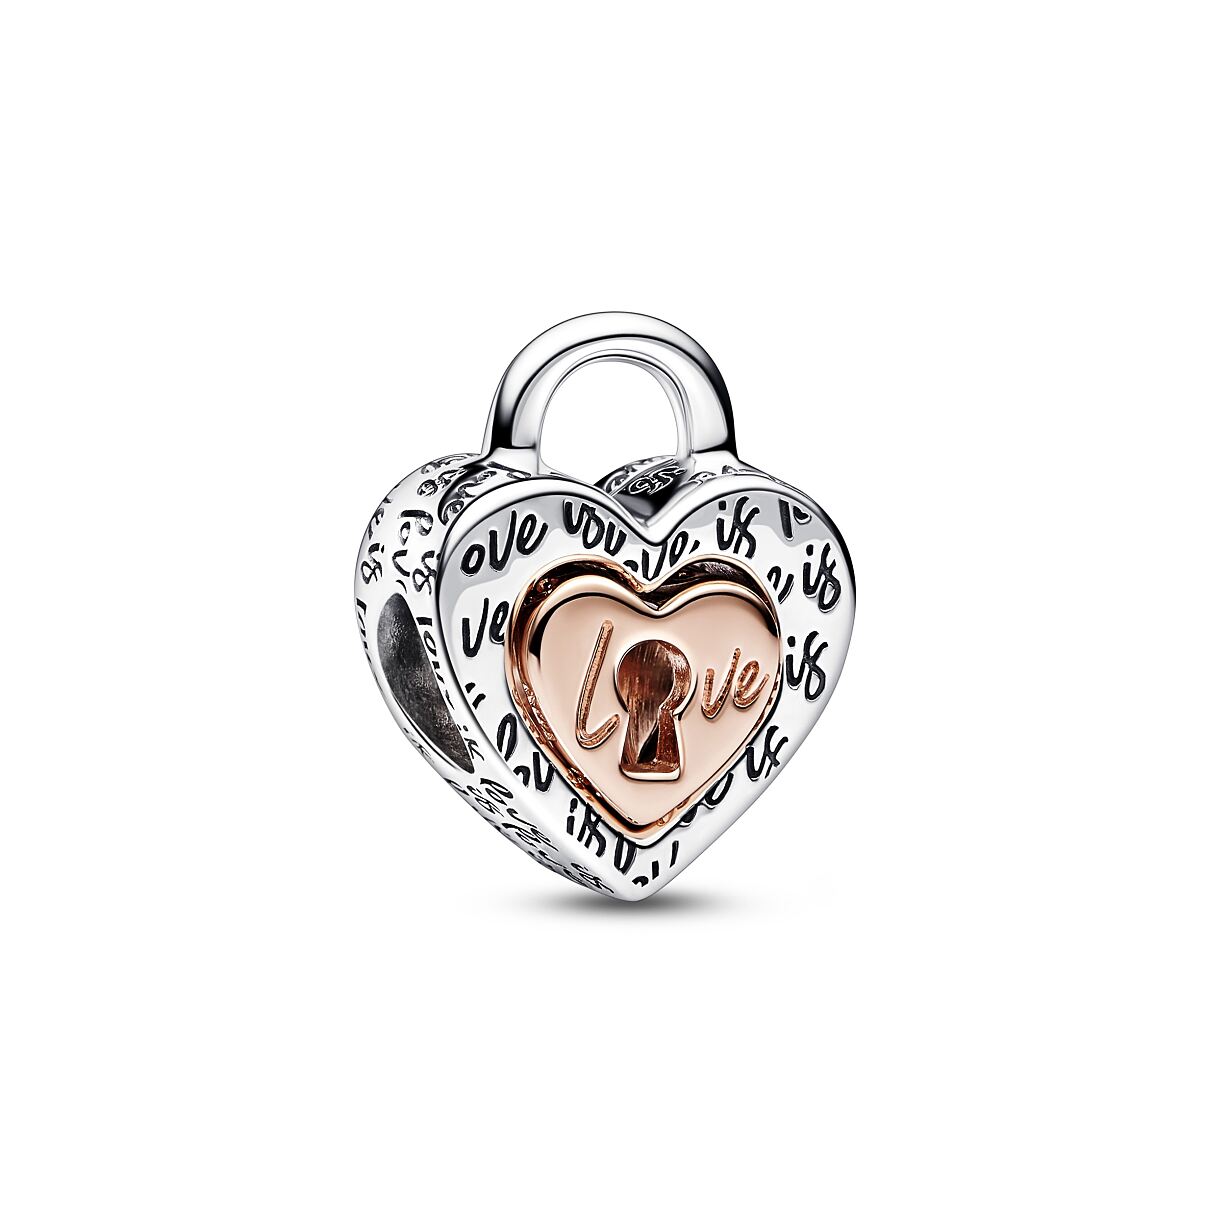 Pandora_Charm_Sterling Silver_Rose 14 k Gold Plated_782505C00 (2)